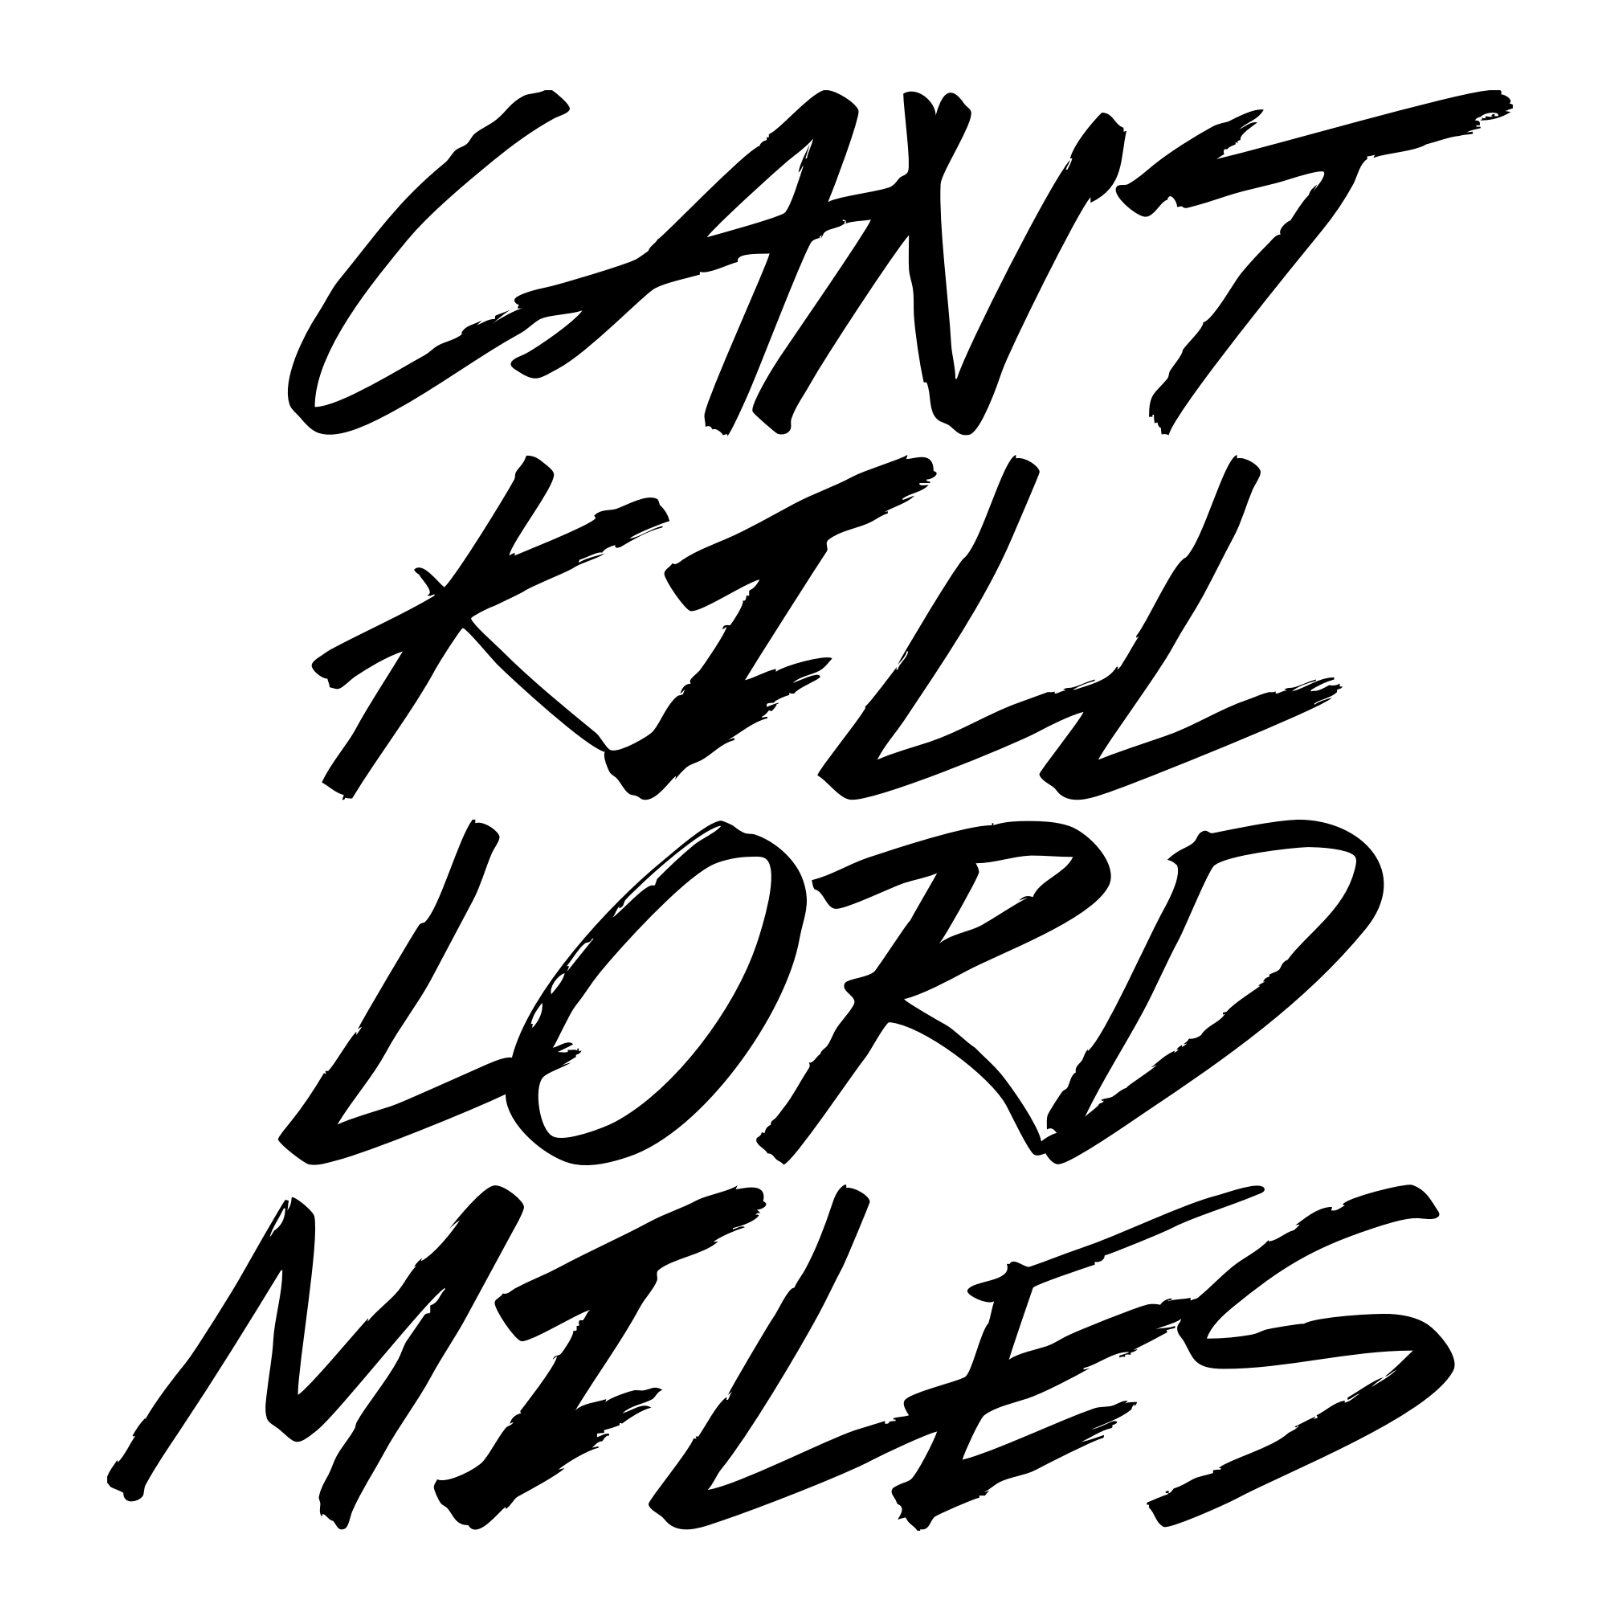 Cant Kill Lord Miles (White) T-Shirt